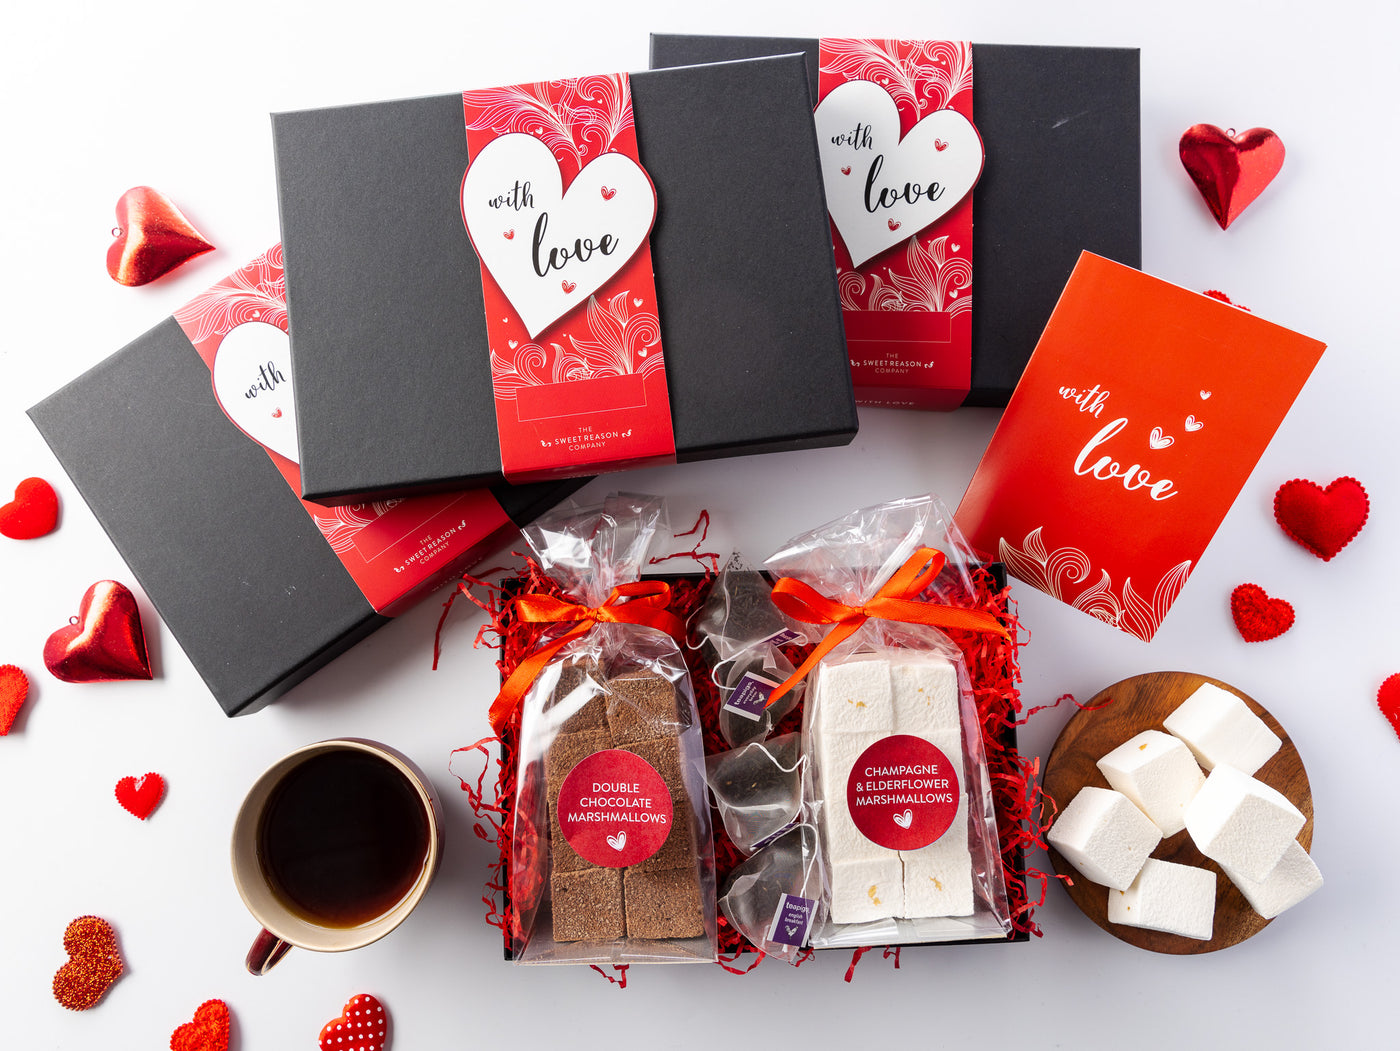 'With Love' Champagne and Elderflower and Double Chocolate Marshmallows Afternoon Tea for Four Gift